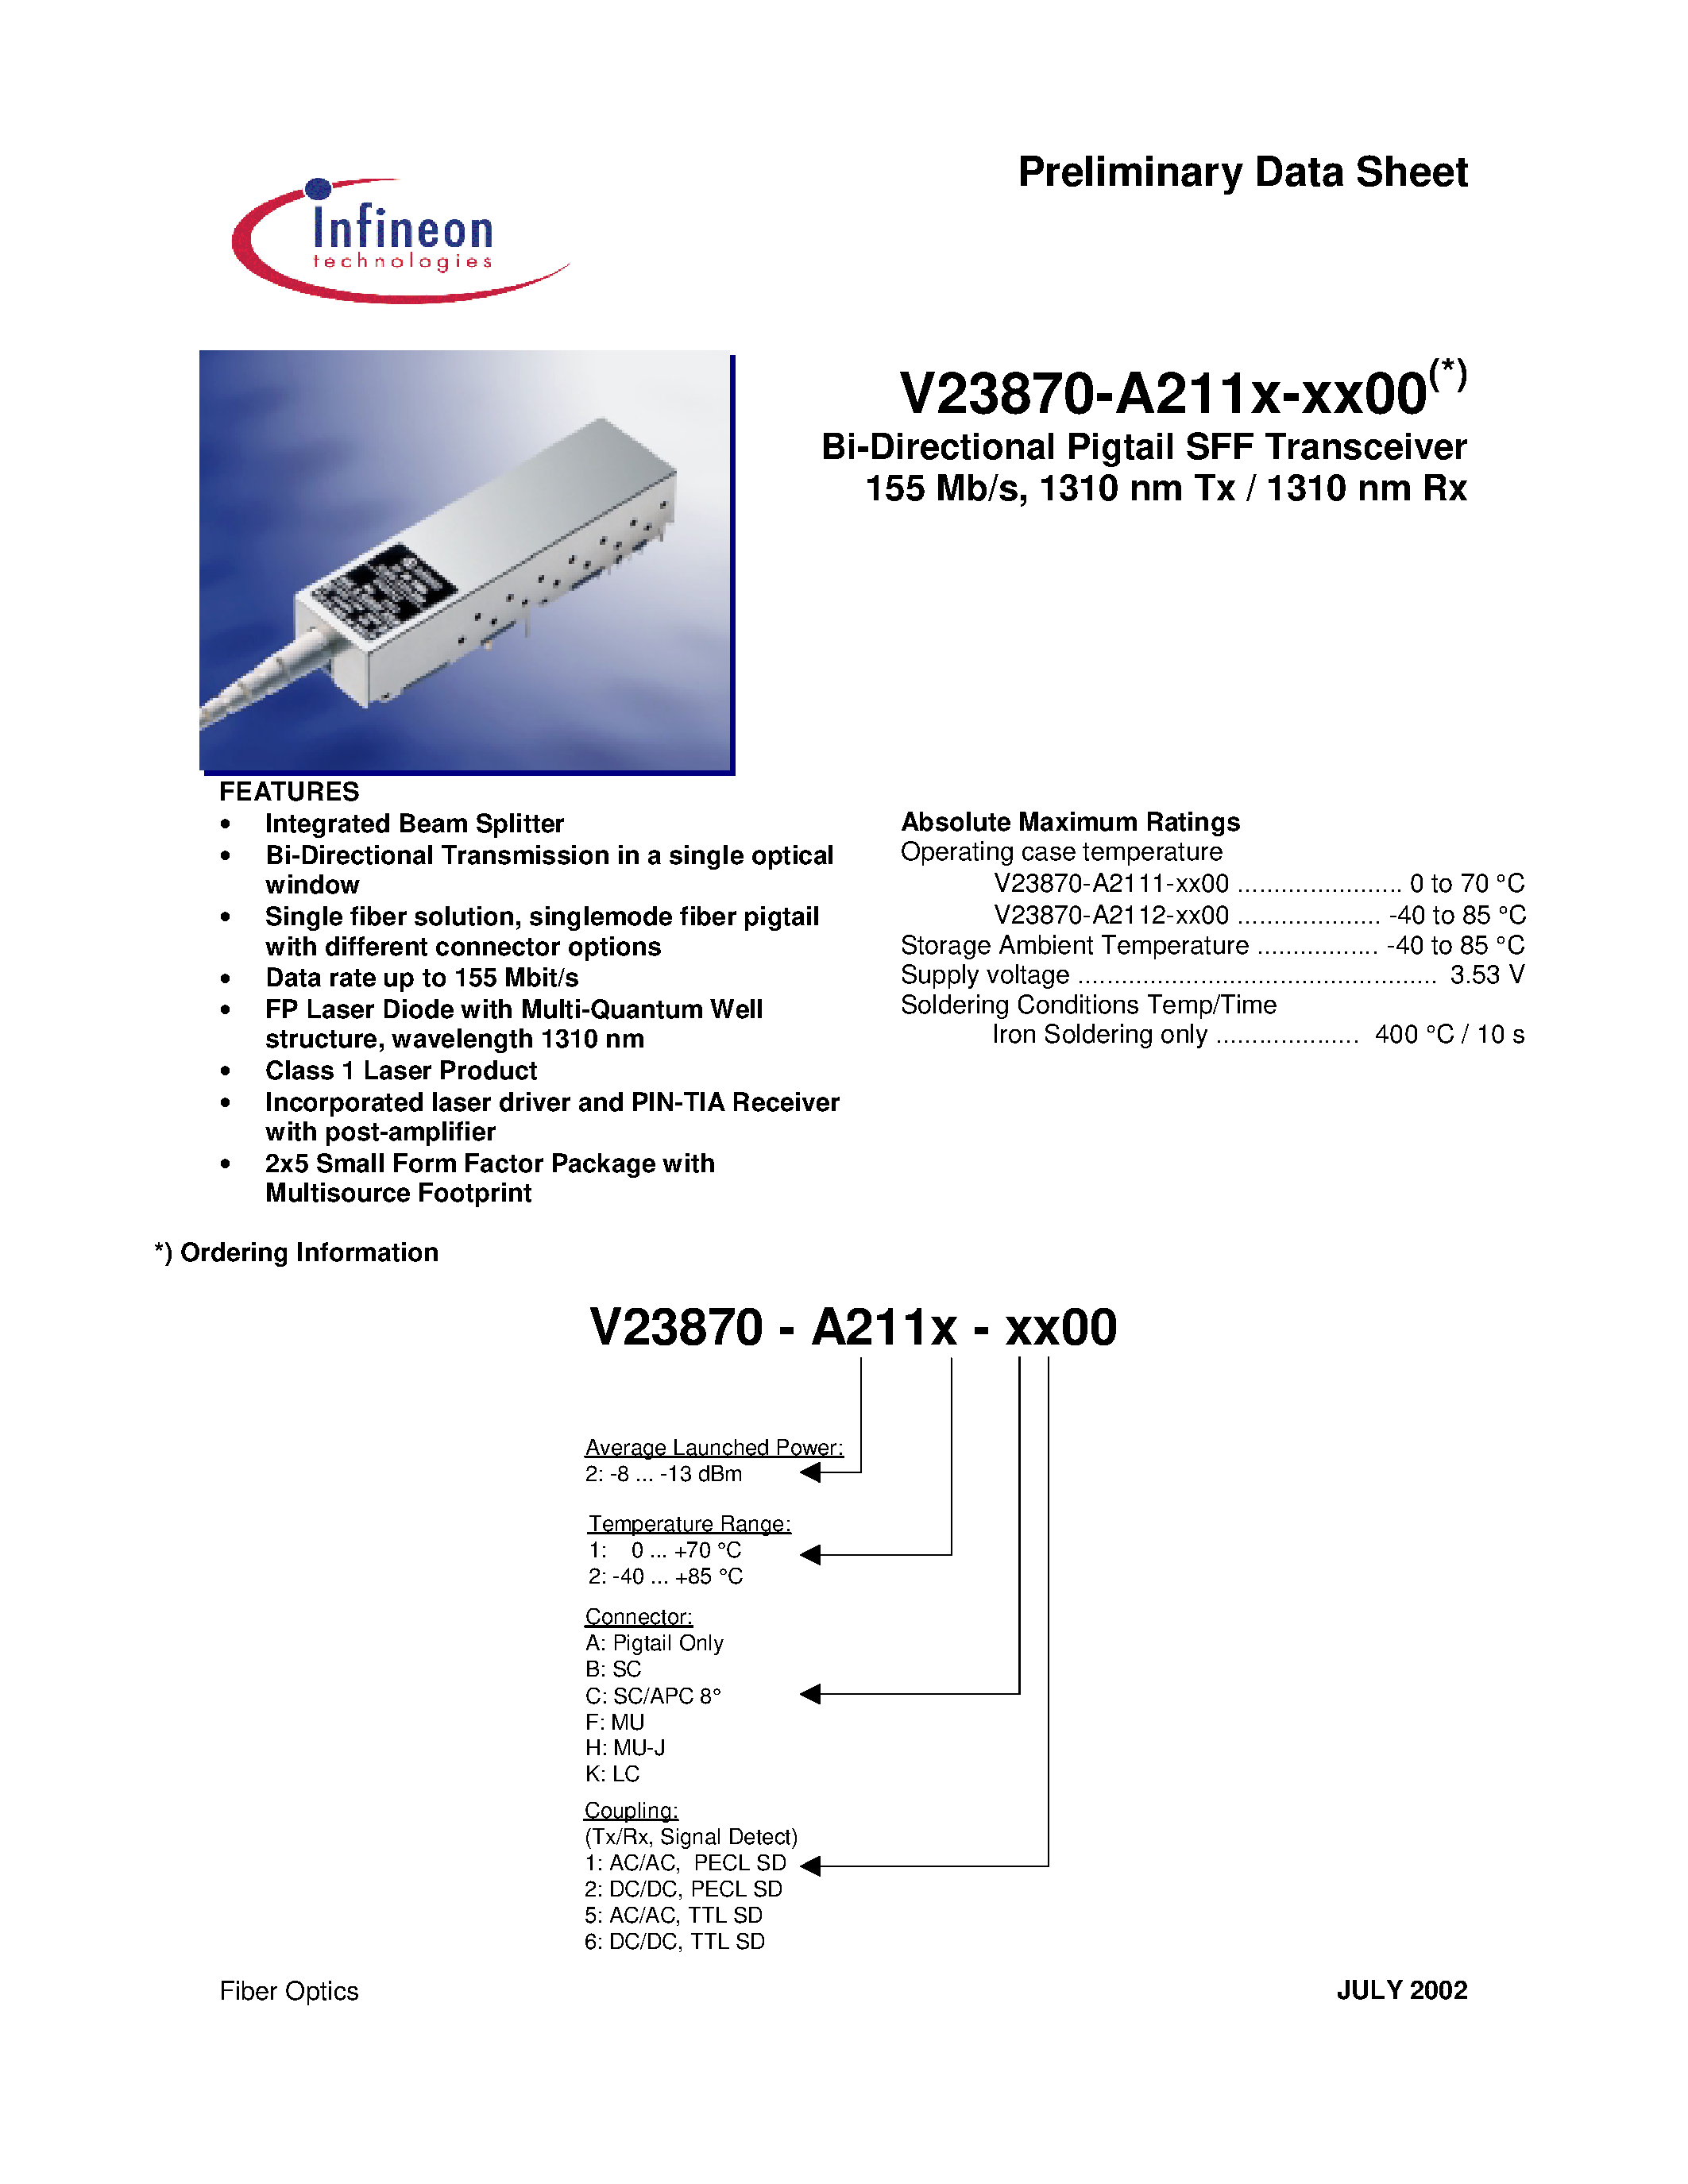 Datasheet V23870-A2111-B100 - Bi-Directional Pigtail SFF Transceiver 155 Mb/s/ 1310 nm Tx / 1310 nm Rx page 1